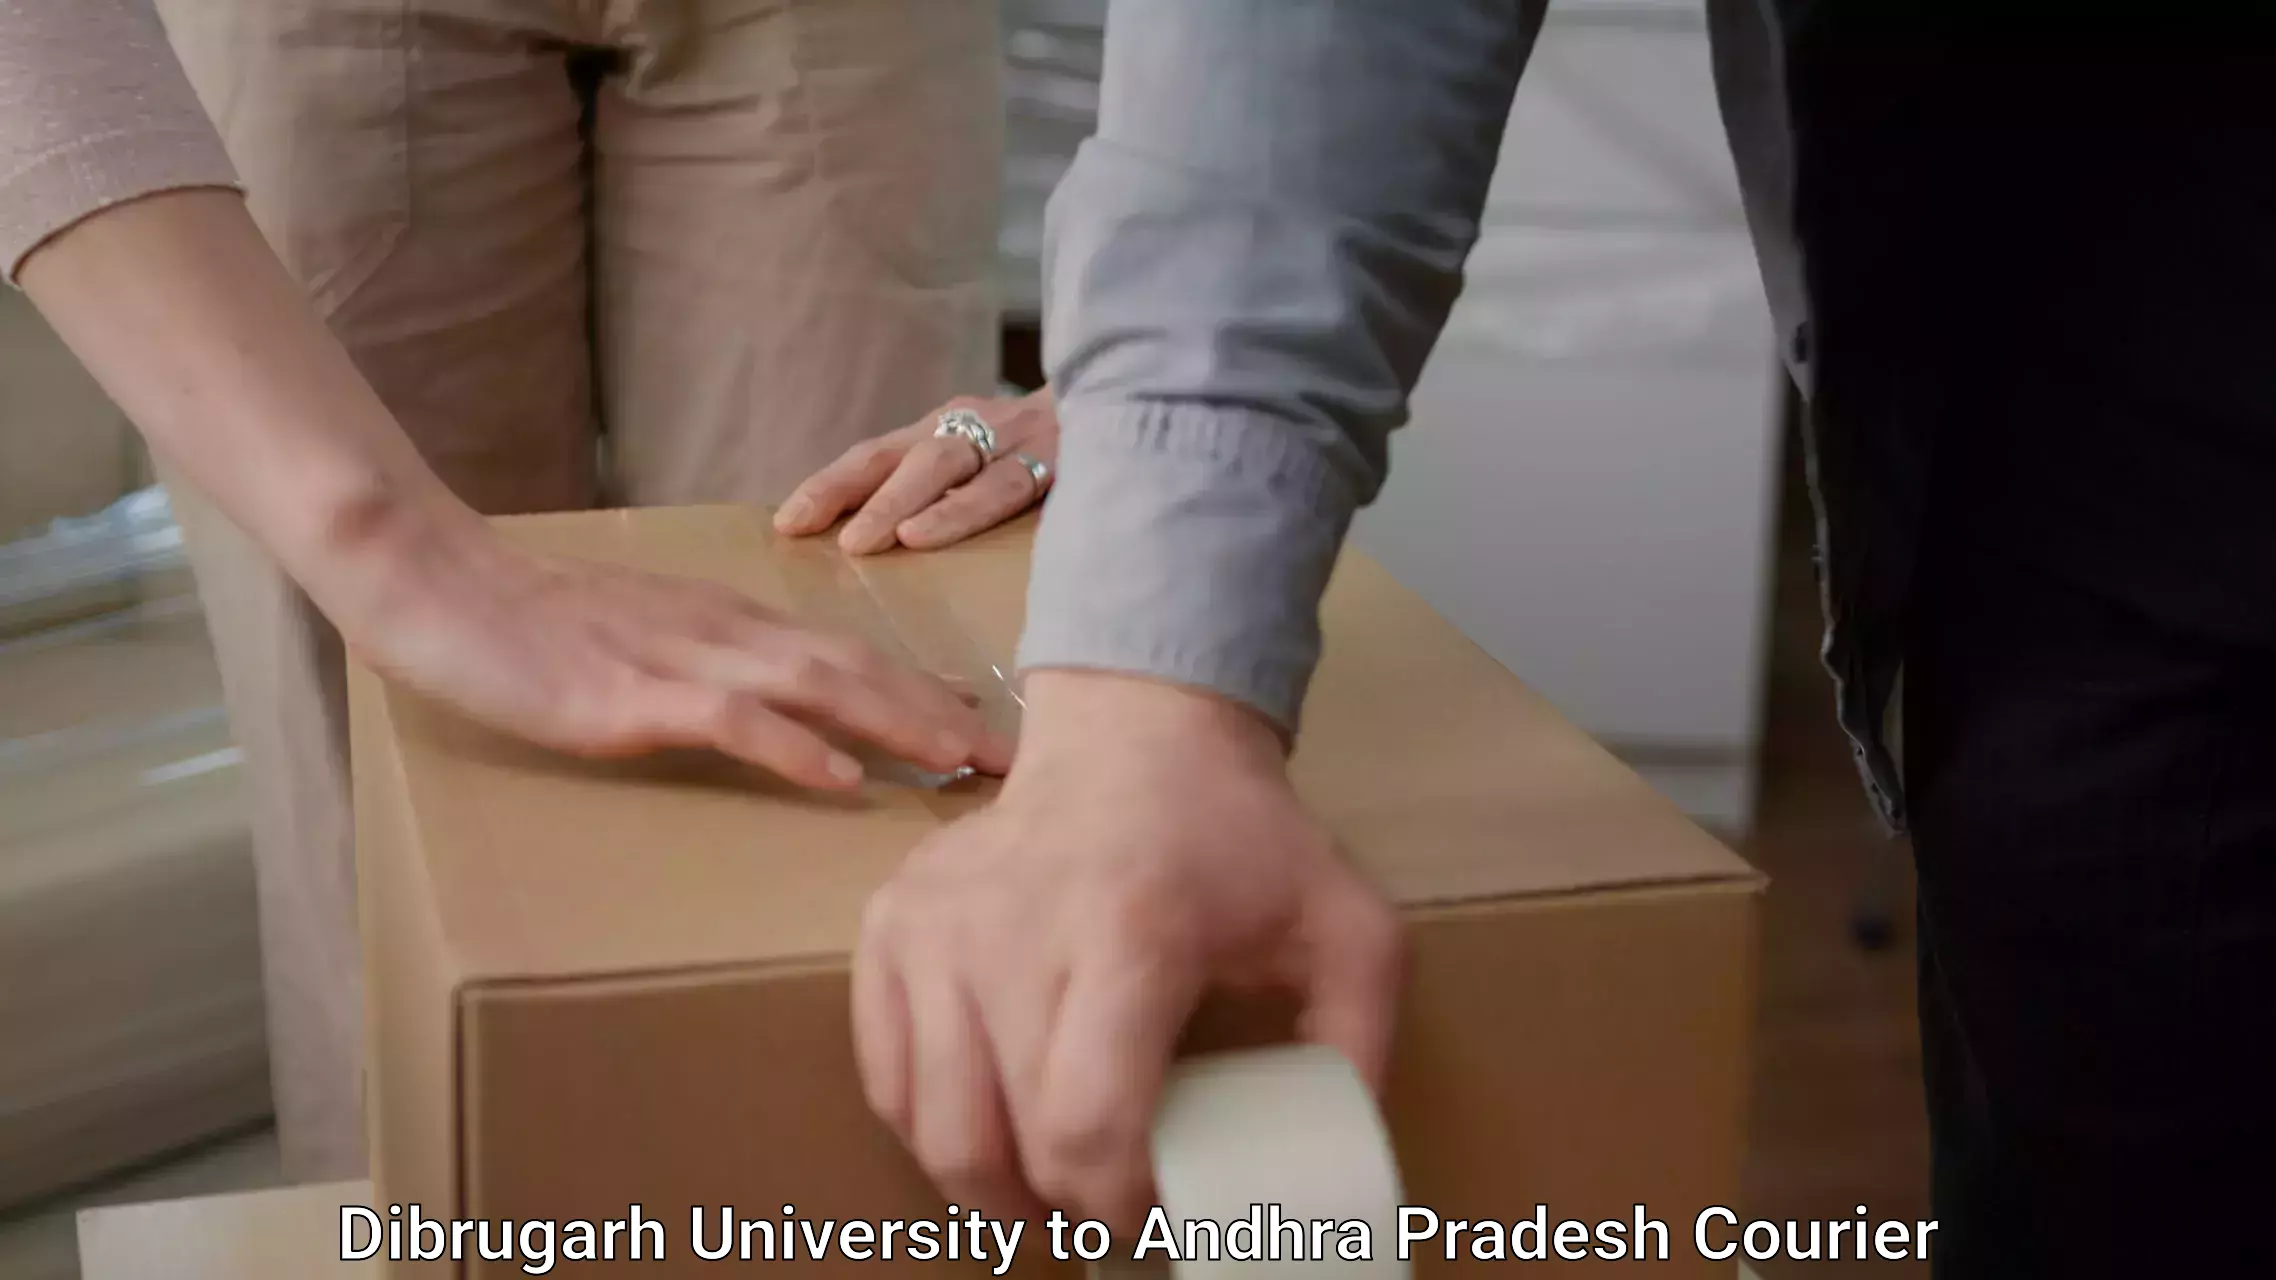 Residential moving services Dibrugarh University to Visakhapatnam